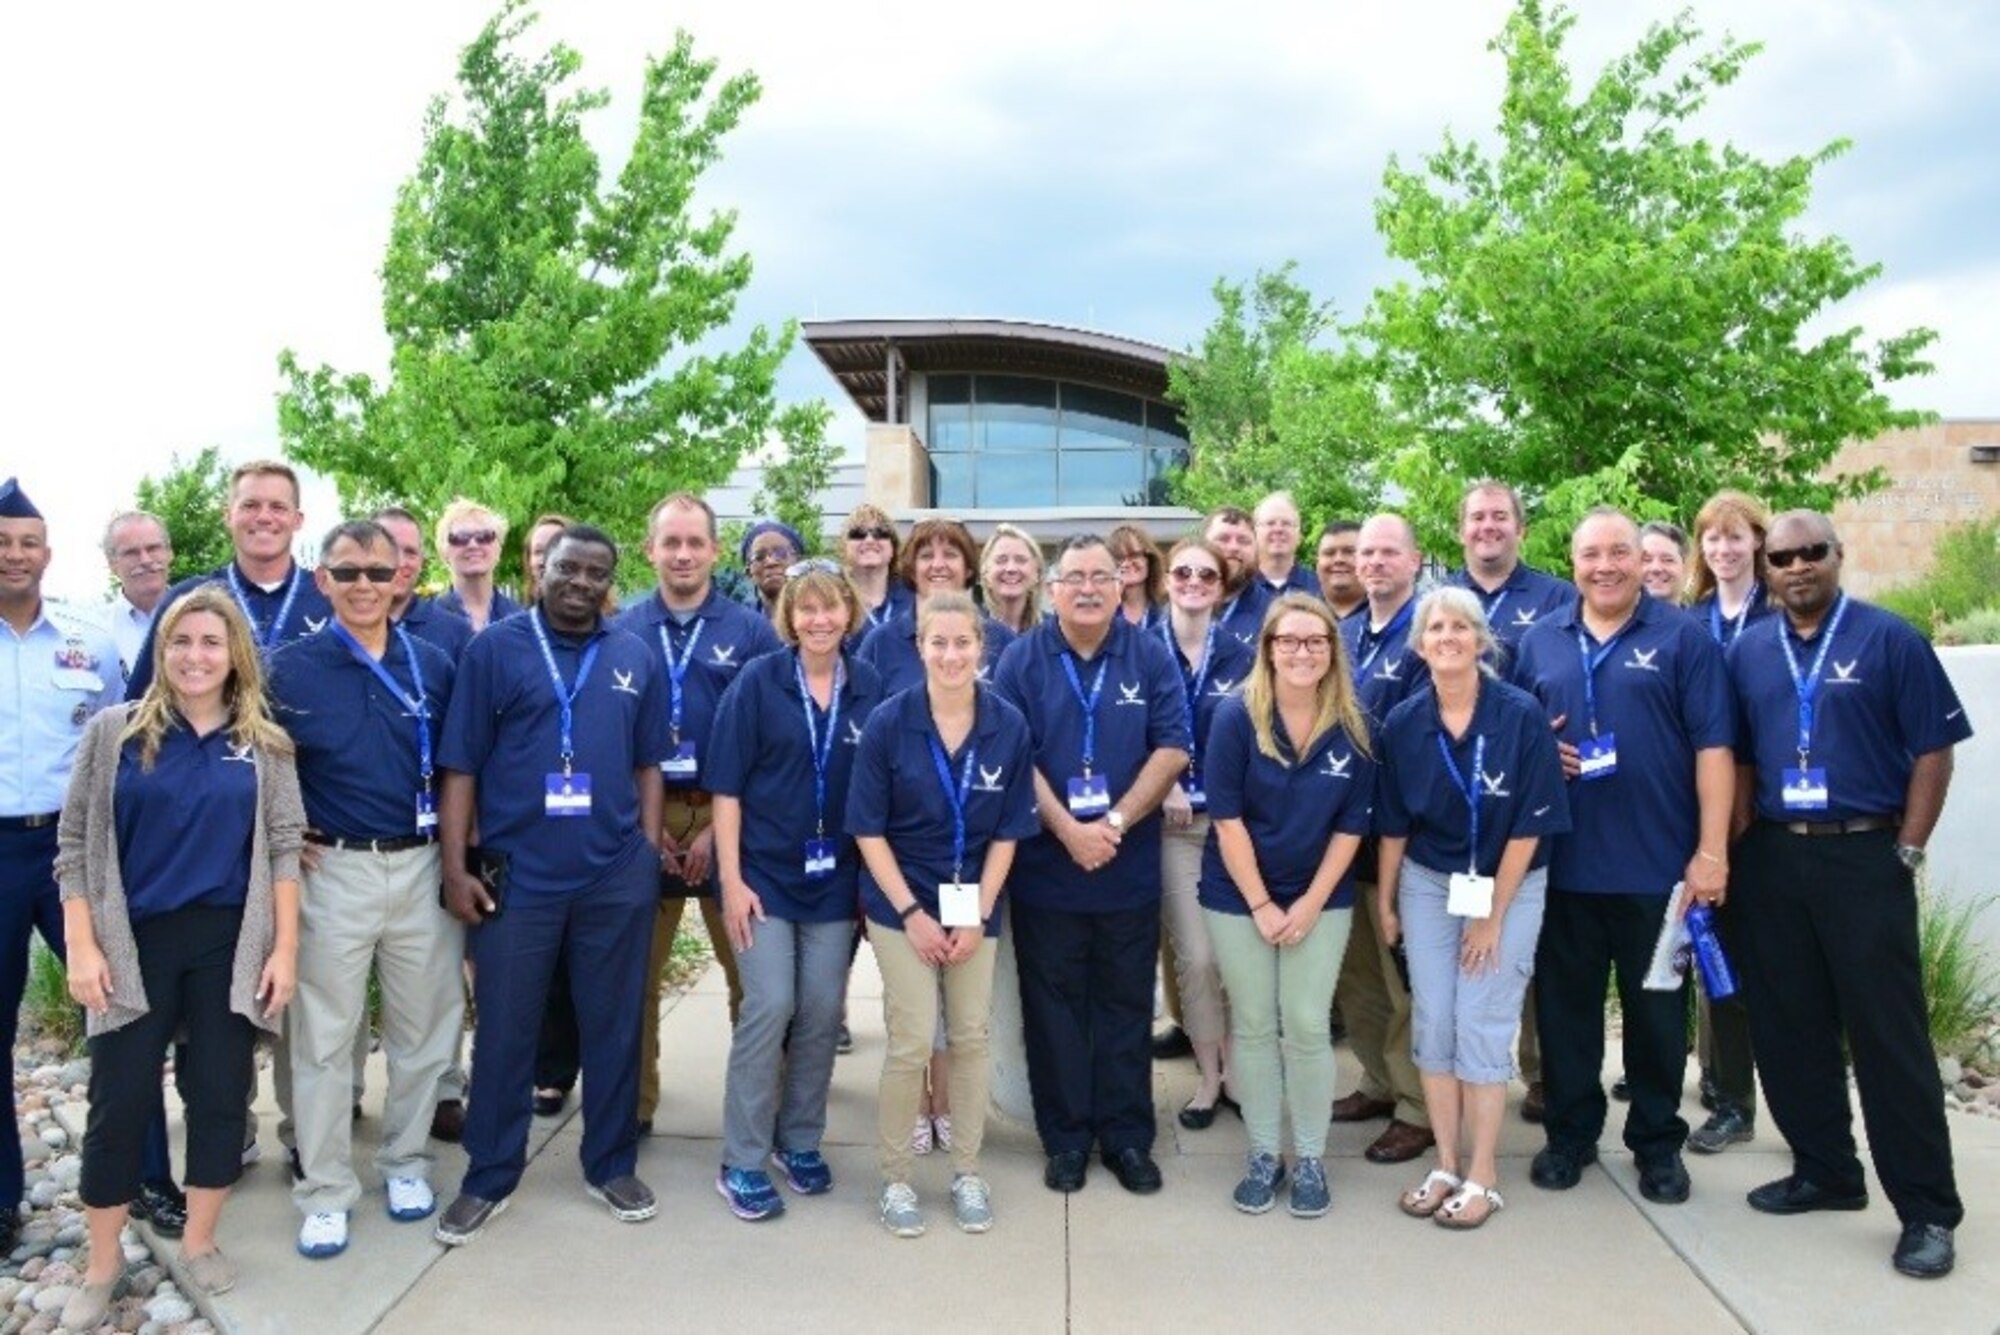 FIRST Educators Tour attendees gather for a photo in front of the Visitor’s Center at Schriever Air Force Base, Colorado, Tuesday, July 25, 2017. The mission of FIRST is to inspire young people to be science and technology leaders and innovators. (U.S. Air Force photo/Halle Thornton)